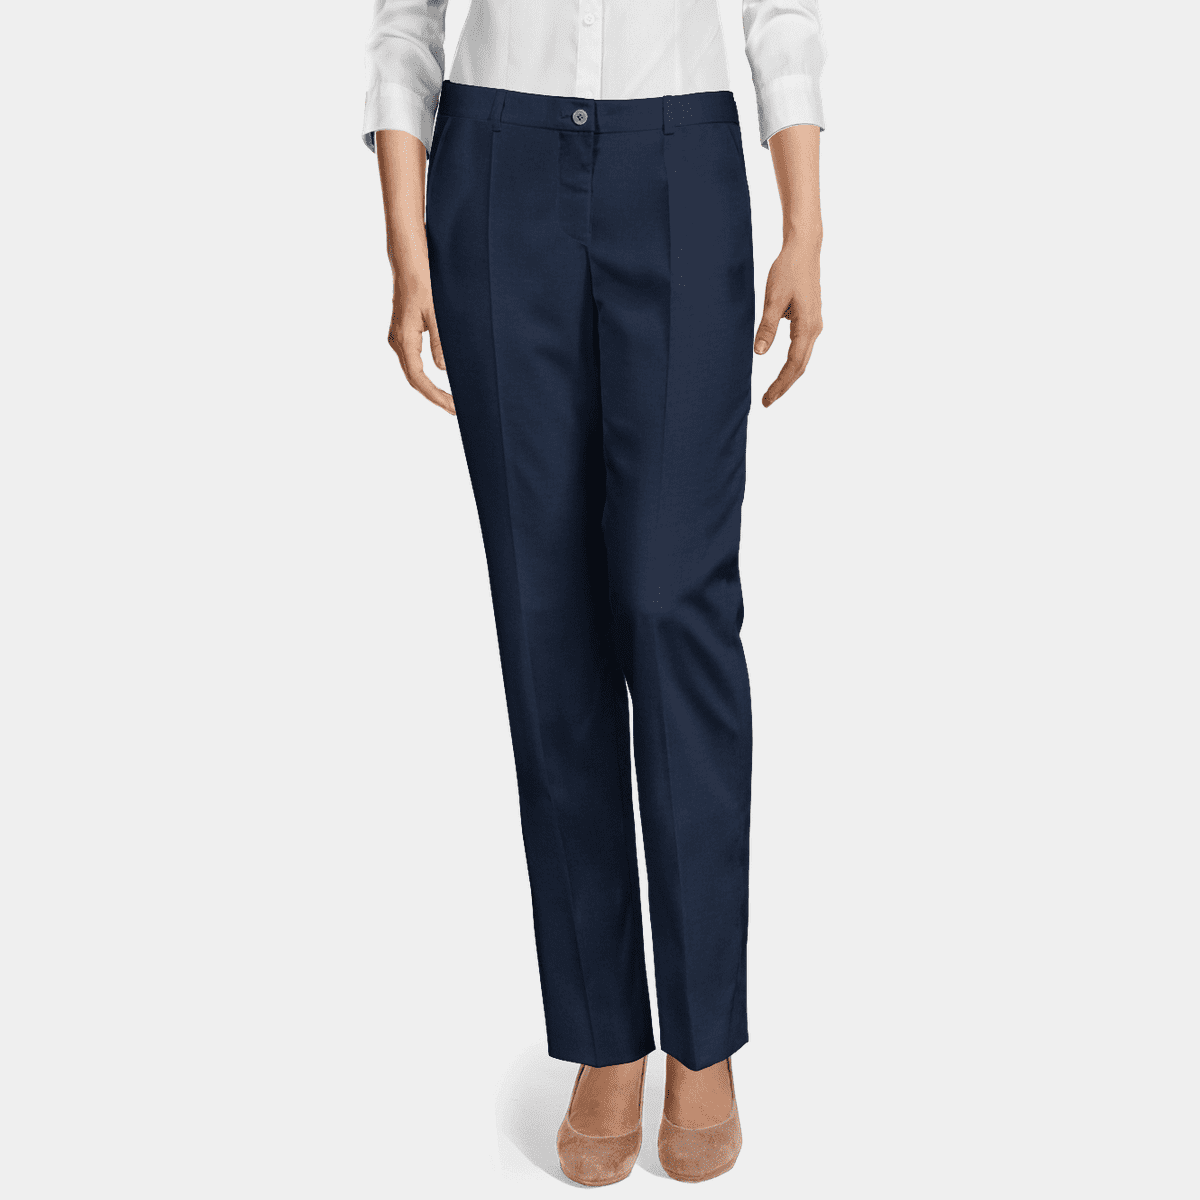 Navy blue flat-front stretch essential Trousers